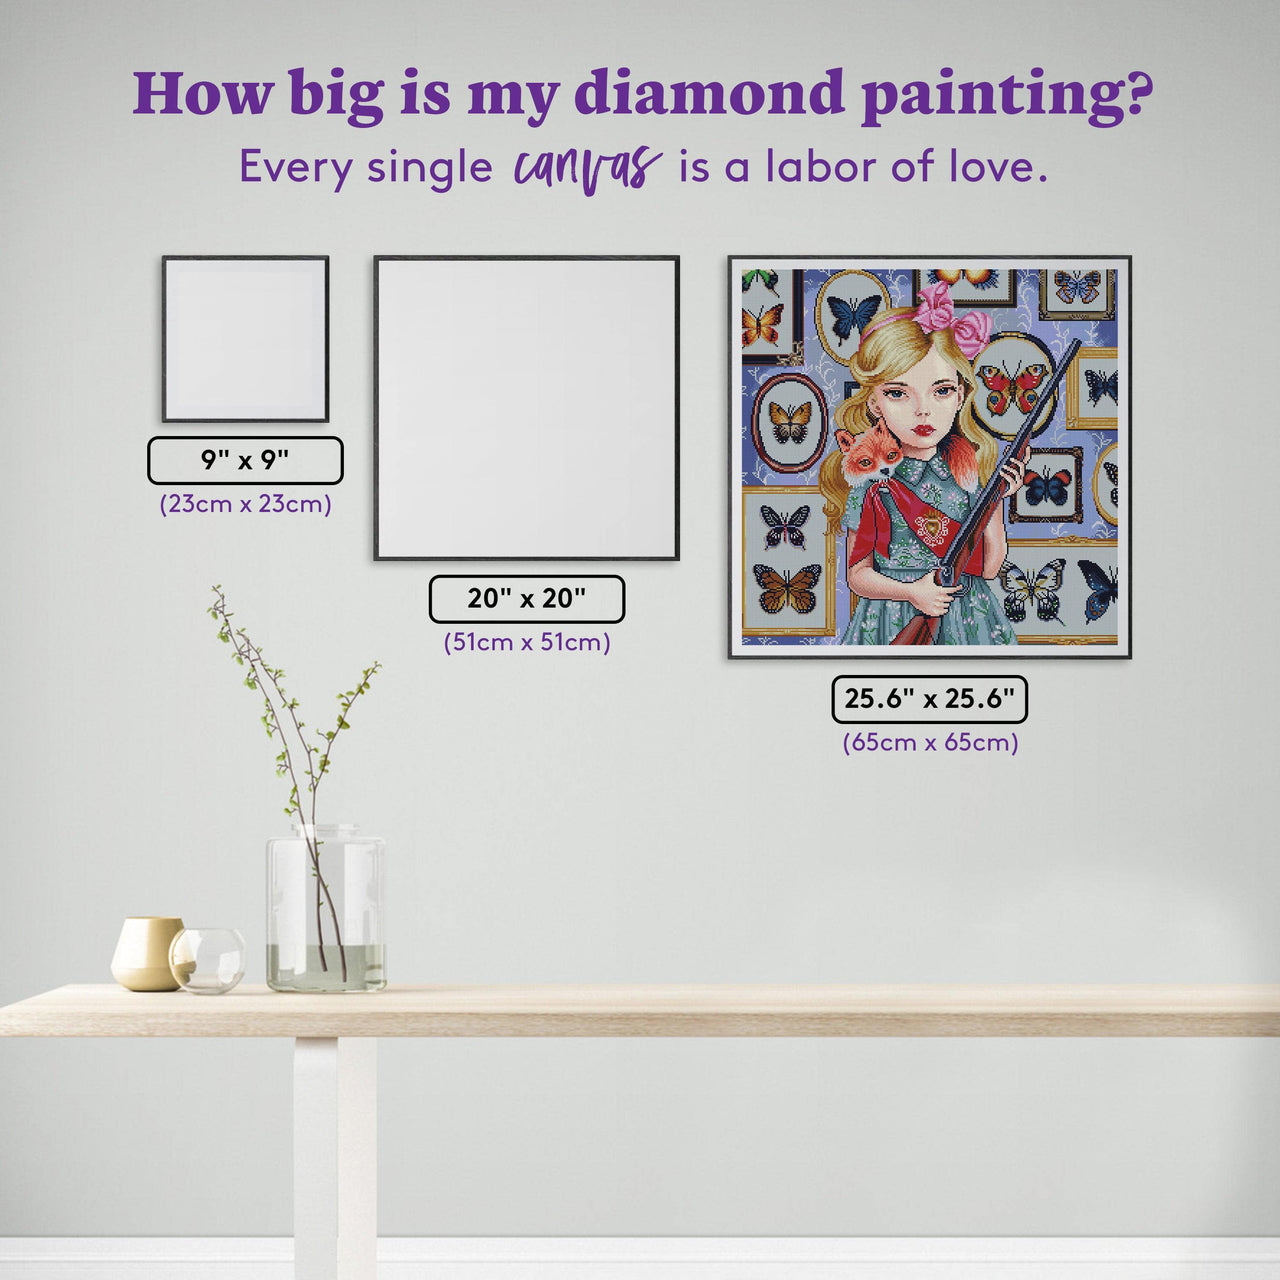 Diamond Painting Private Collection 25.6" x 25.6" (65cm x 65cm) / Square with 62 Colors including 2 ABs / 68,121